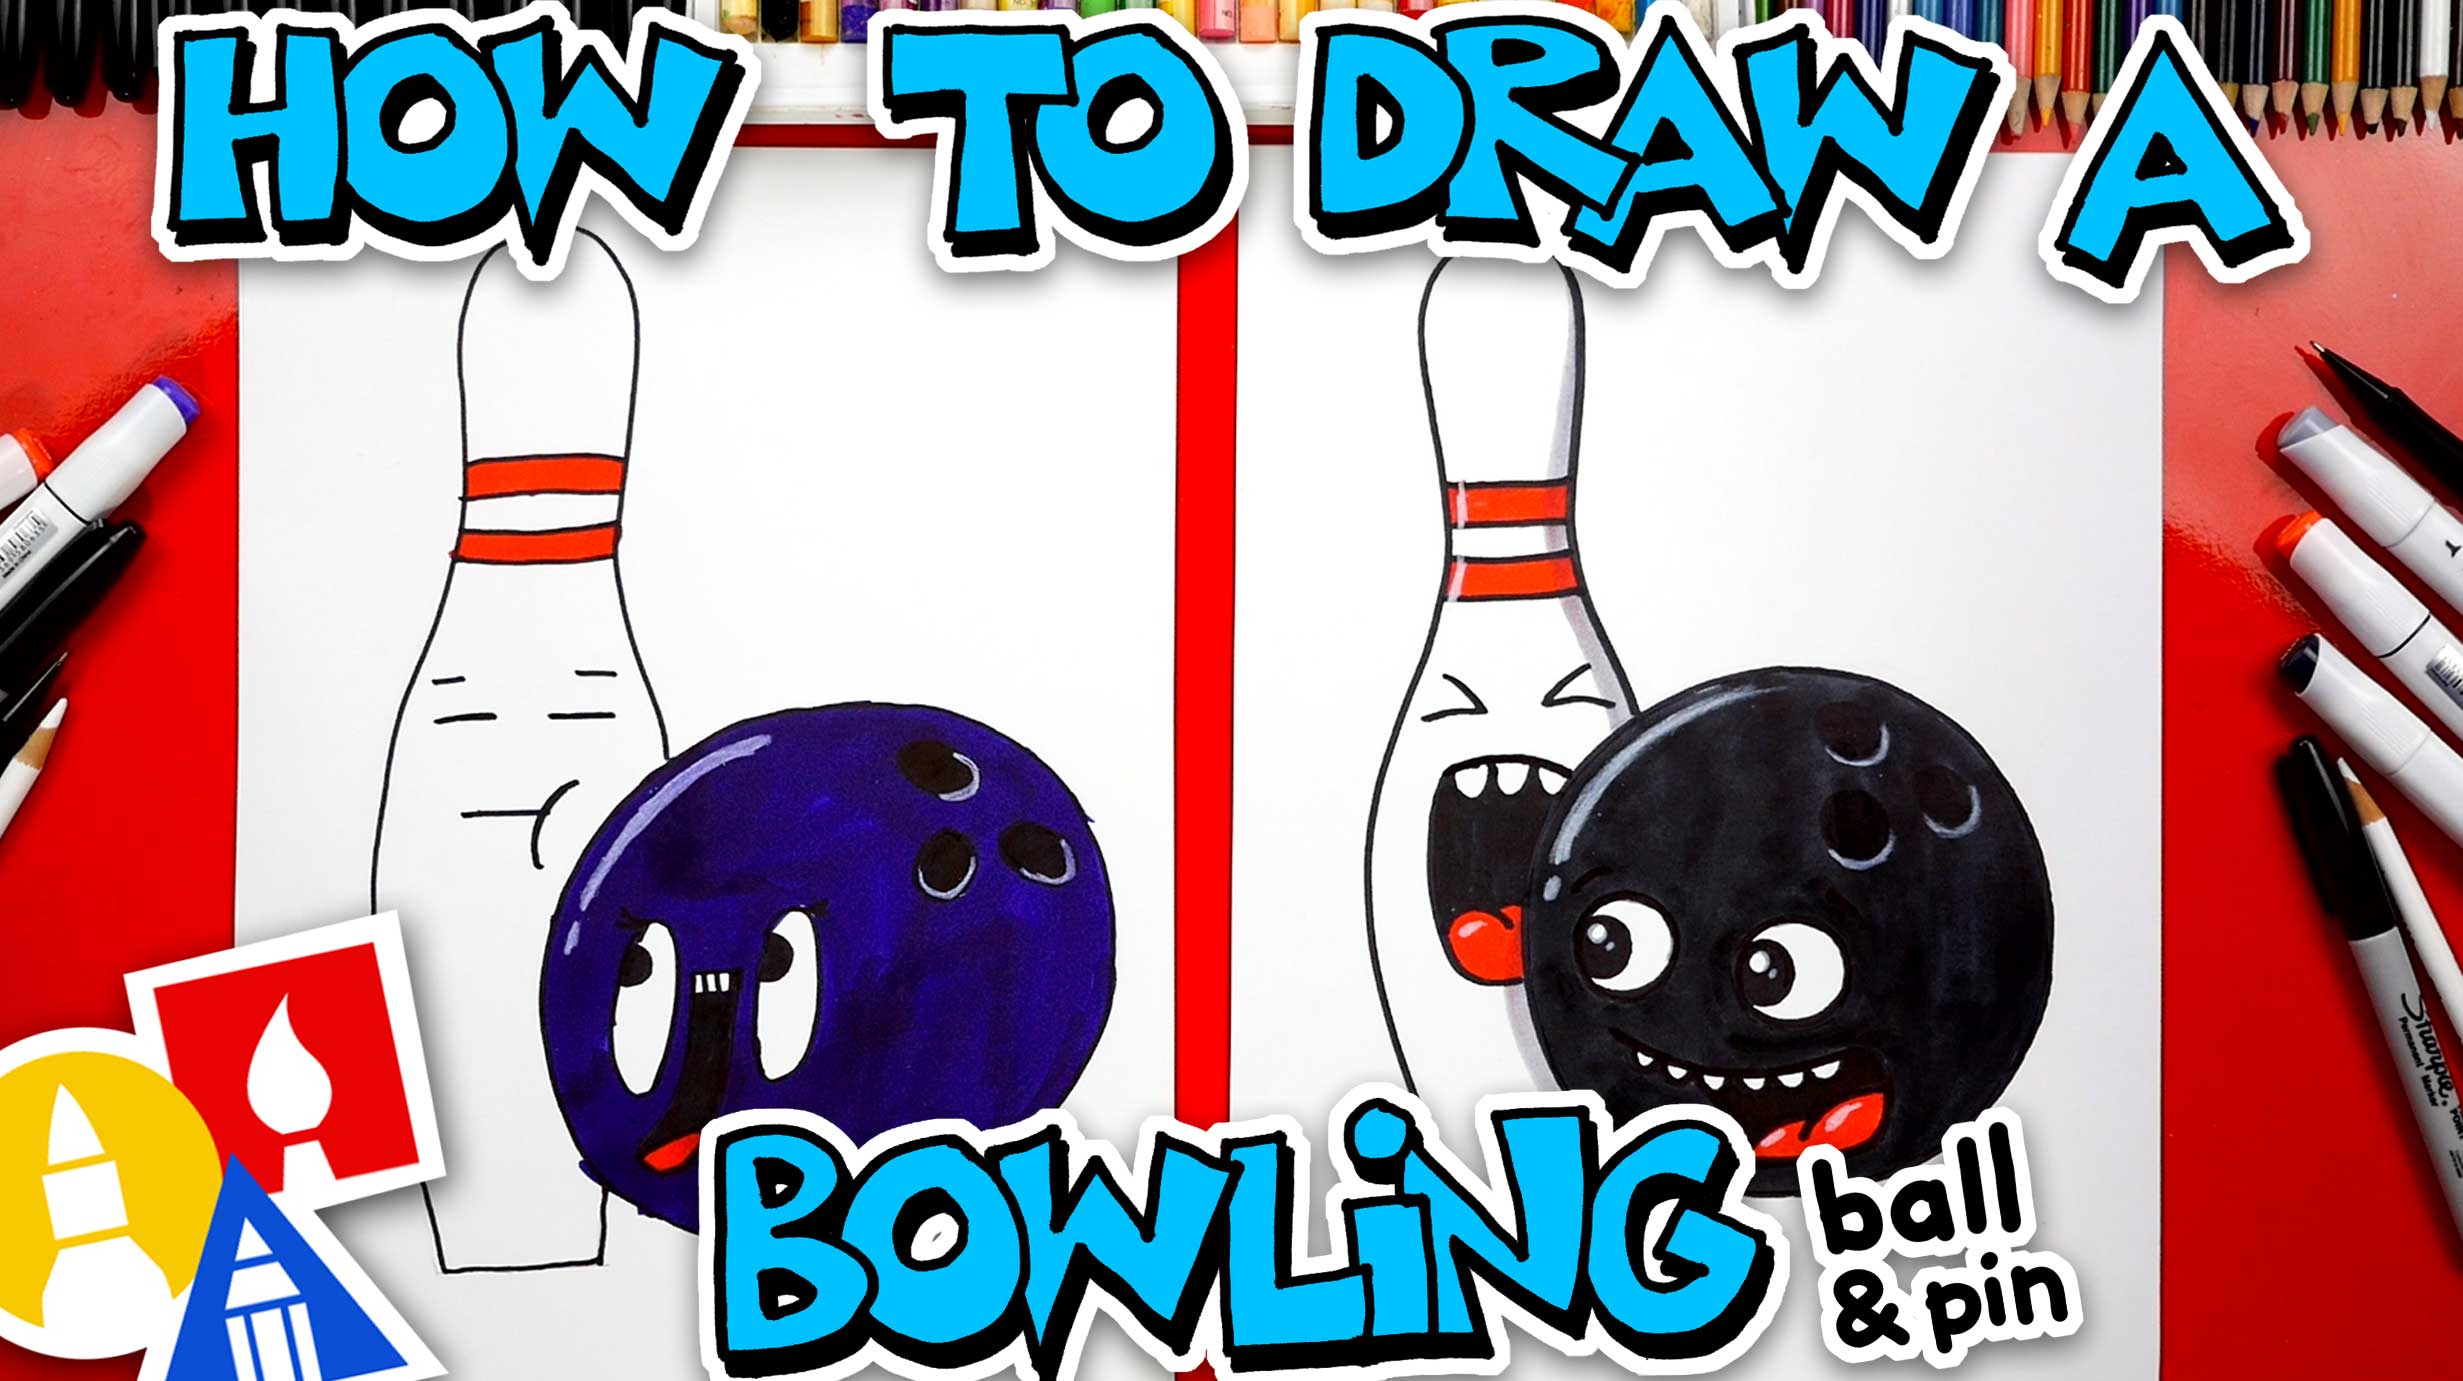 How To Draw A Funny Bowling Ball And Pin - Art For Kids Hub